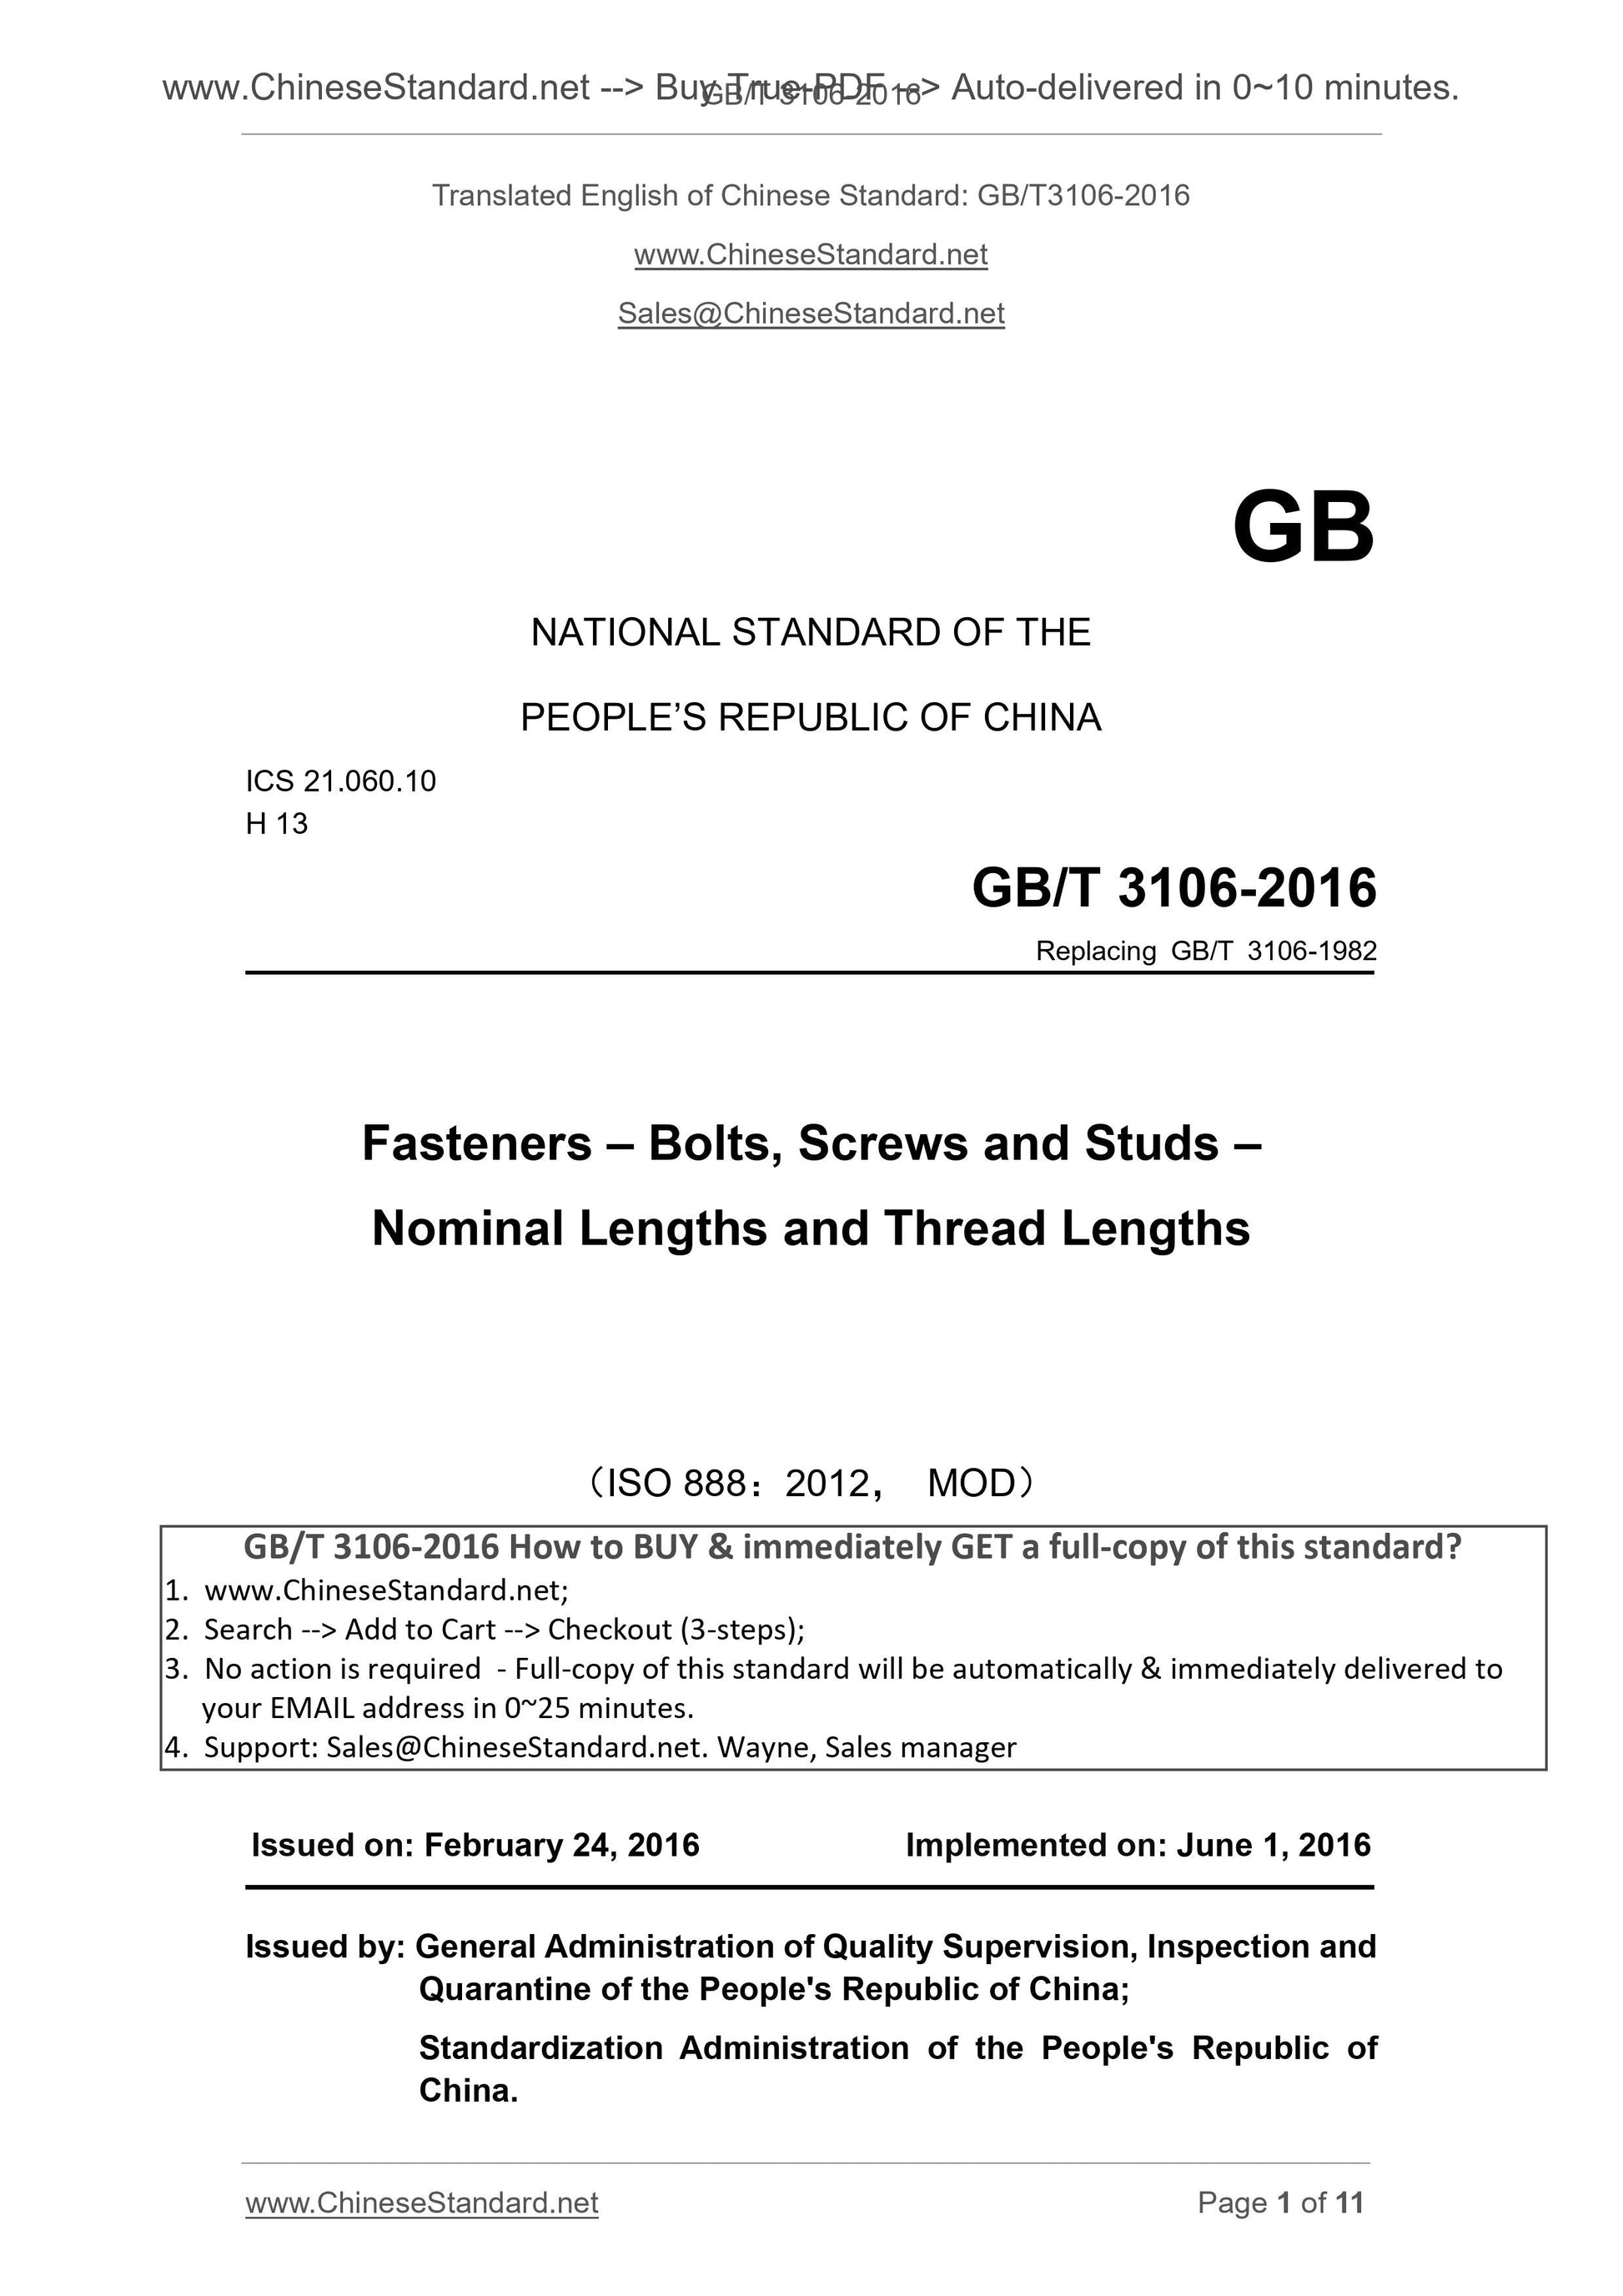 GB/T 3106-2016 Page 1